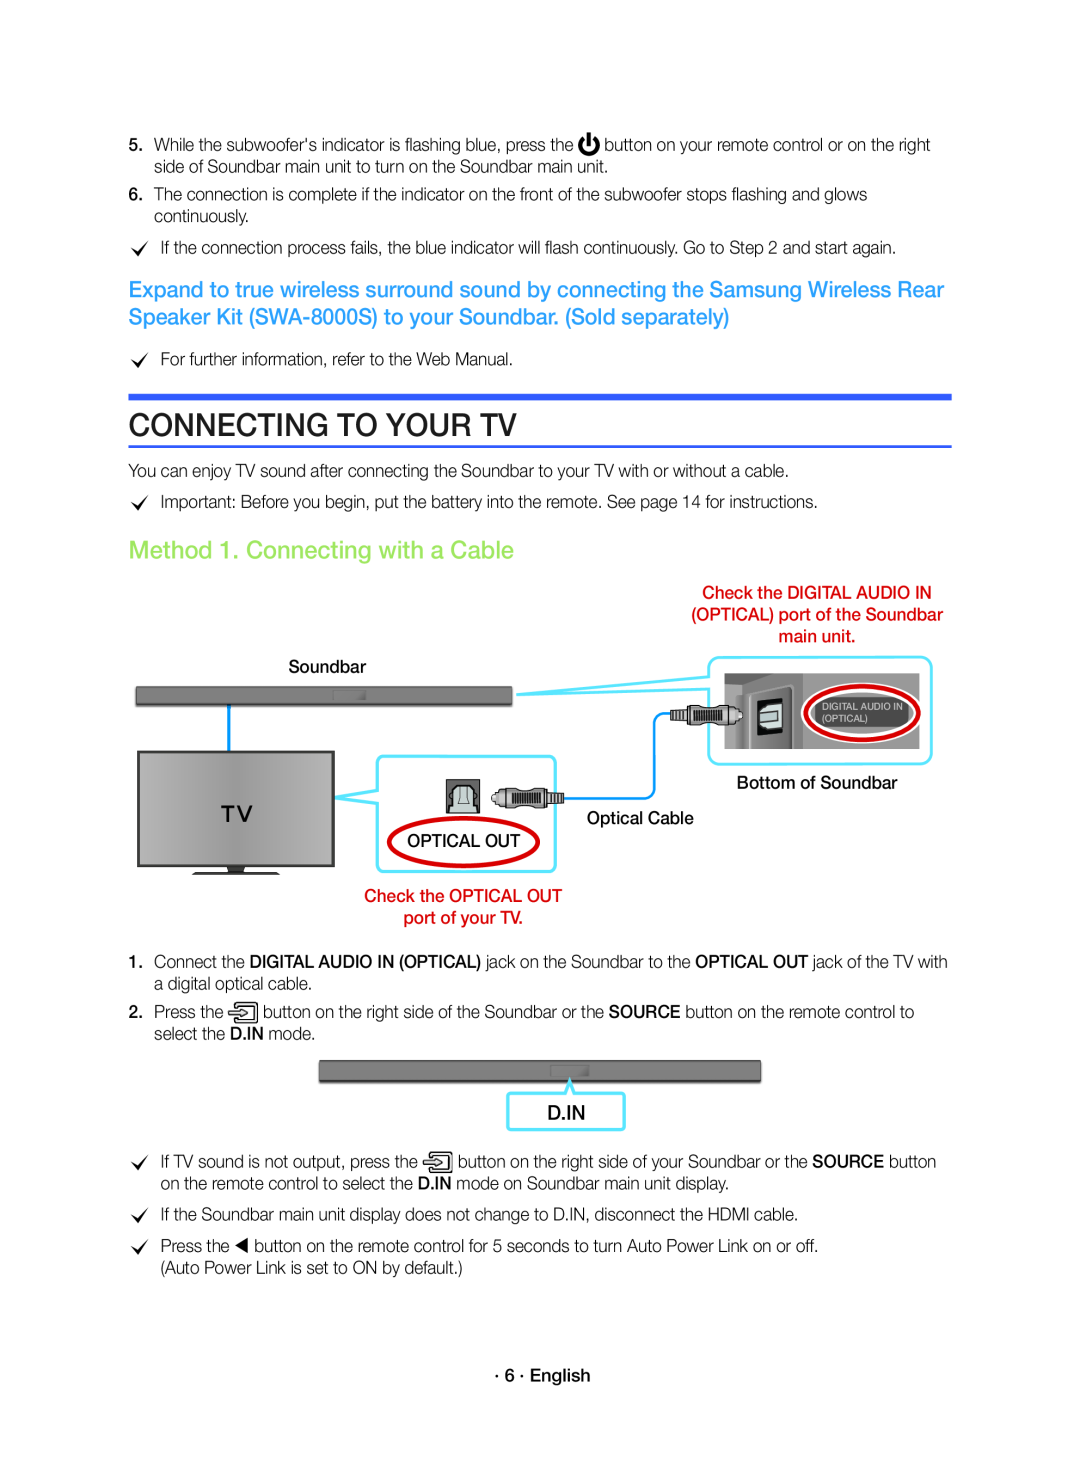 Method 1. Connecting with a Cable Standard HW-K550